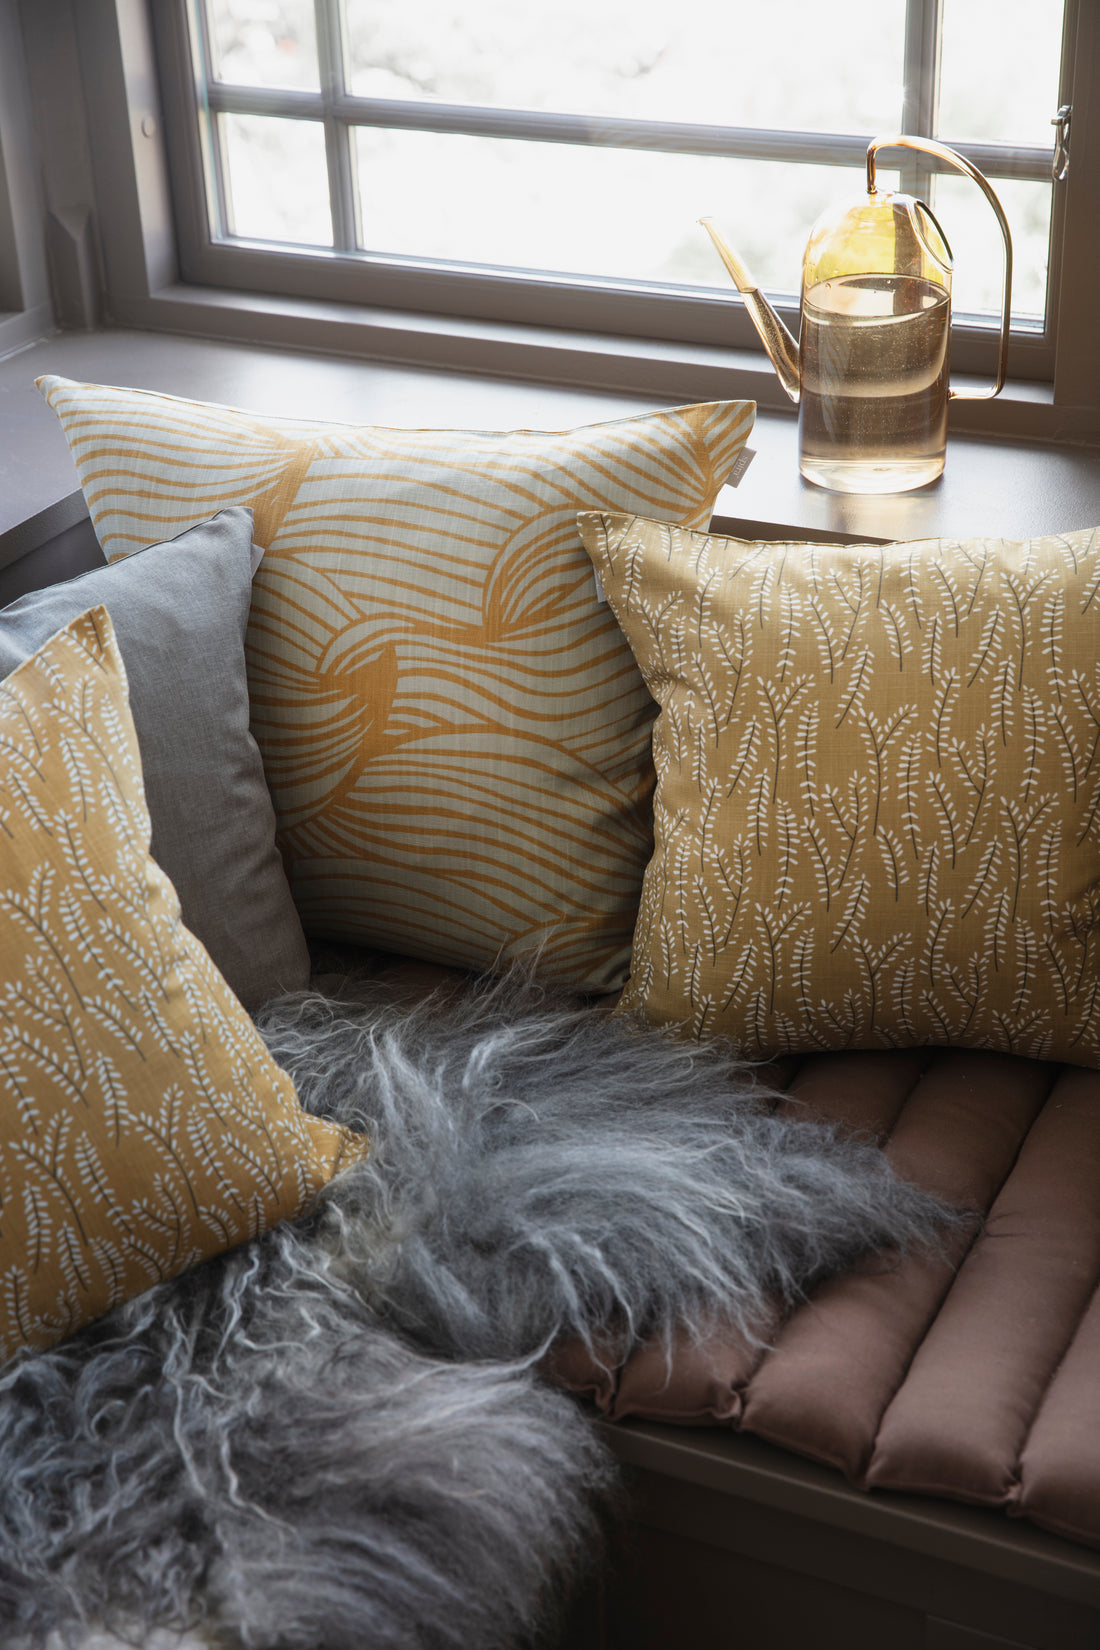 The NEW Autumn cushion collection by Spira of Sweden has arrived!!!